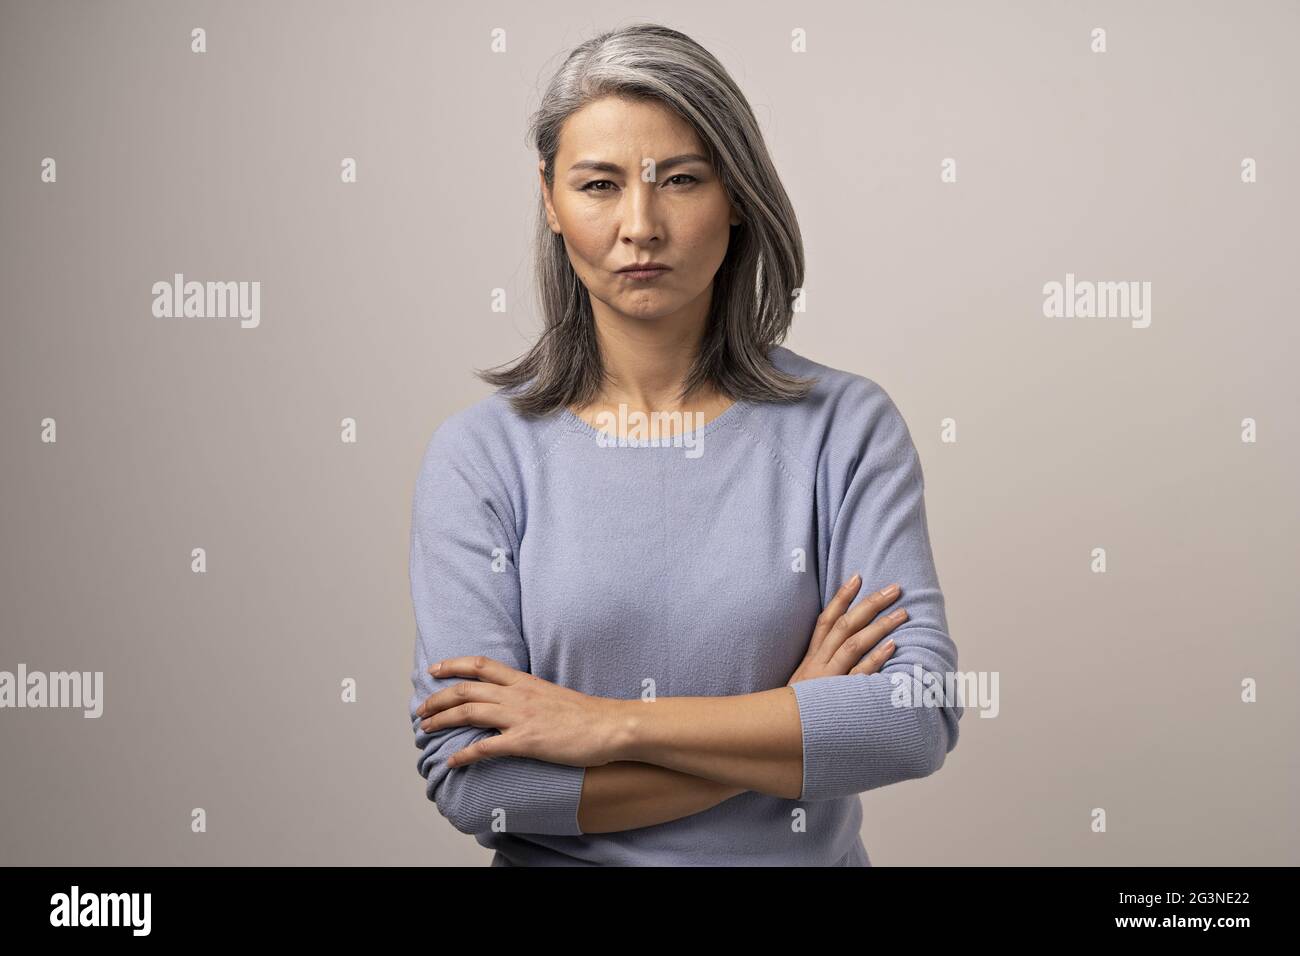 Serious Mongolian Woman with Gray Hair Against the Backdrop of Gray. Stock Photo